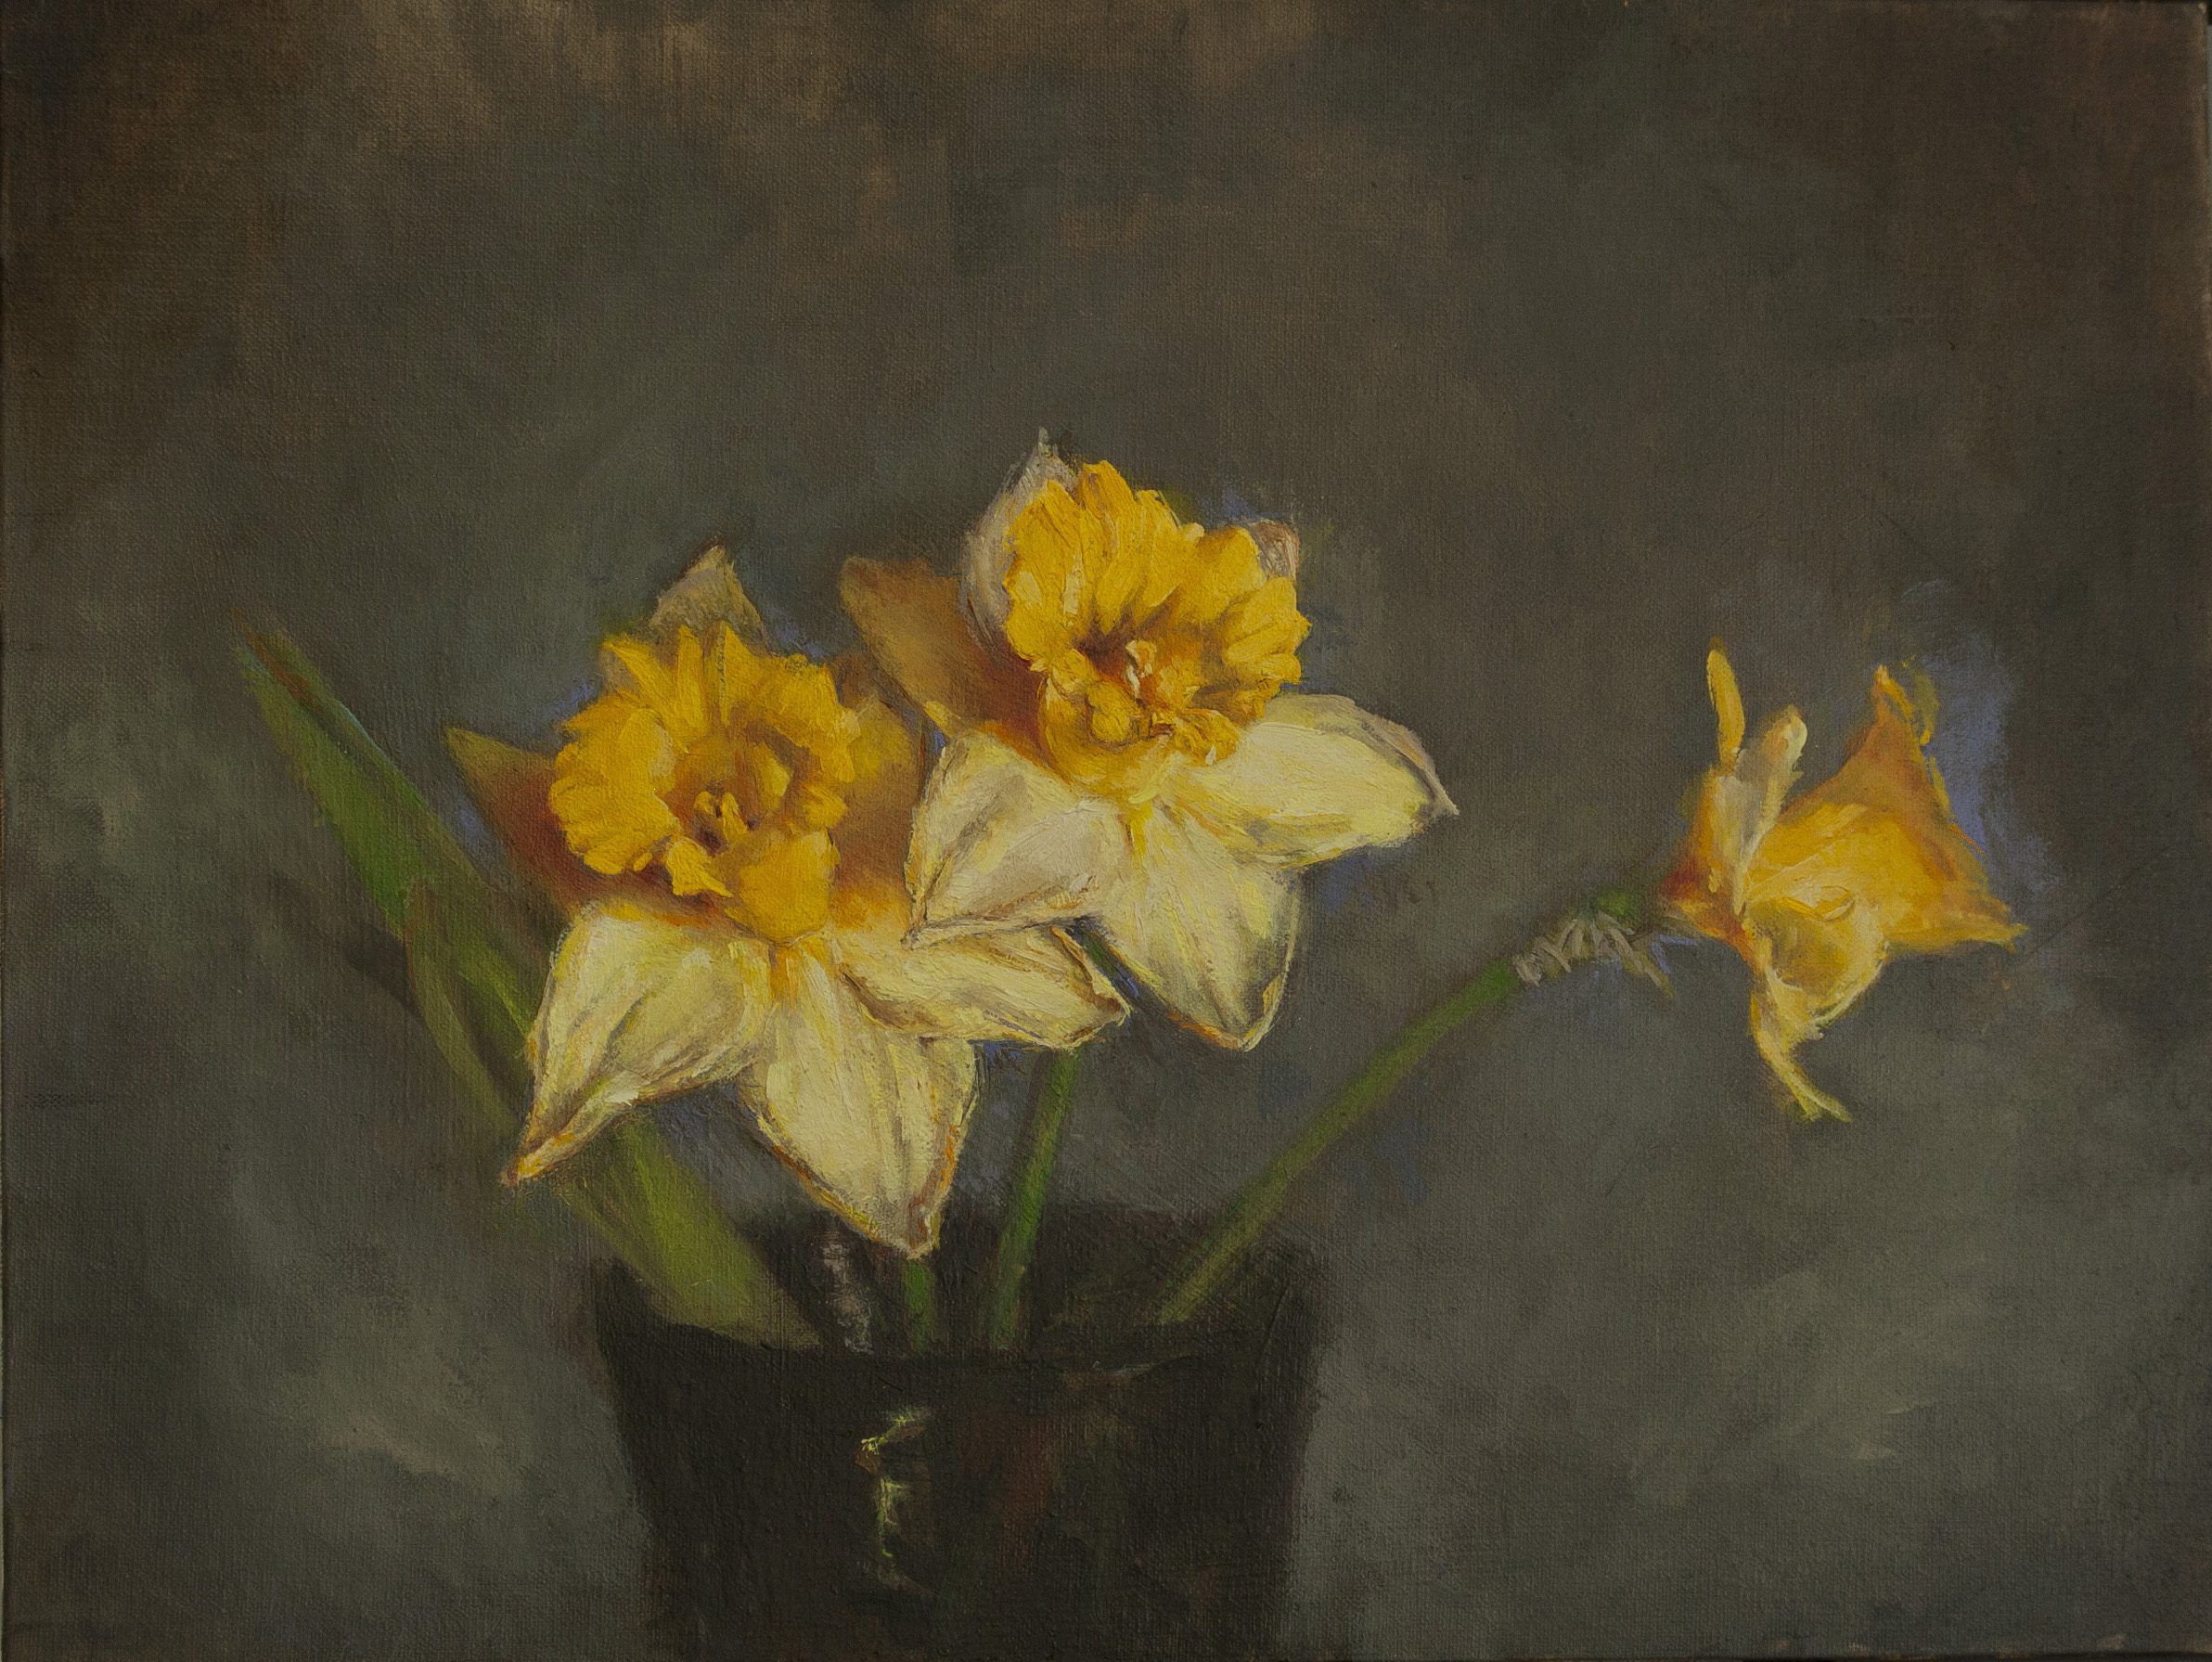 David Zeggert's Daffodils created with the modified Cox palette, which features a limitless range of chromatic blacks.